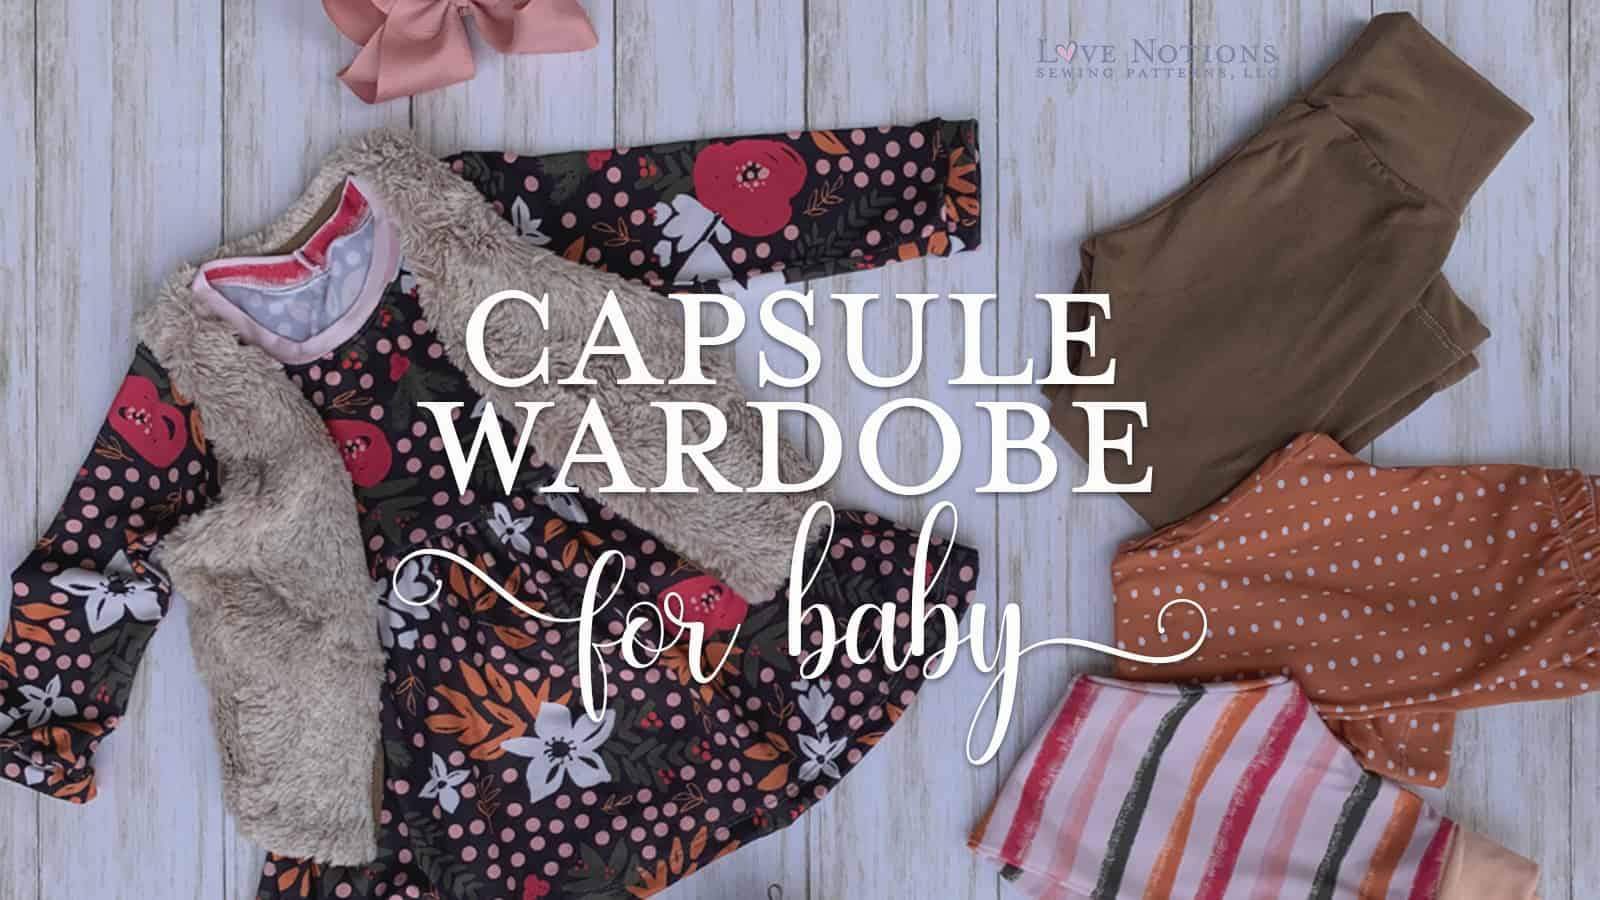 Love Notions Capsule Wardrobe featuring CLUB Double Brushed Poly - Raspberry Creek Fabrics